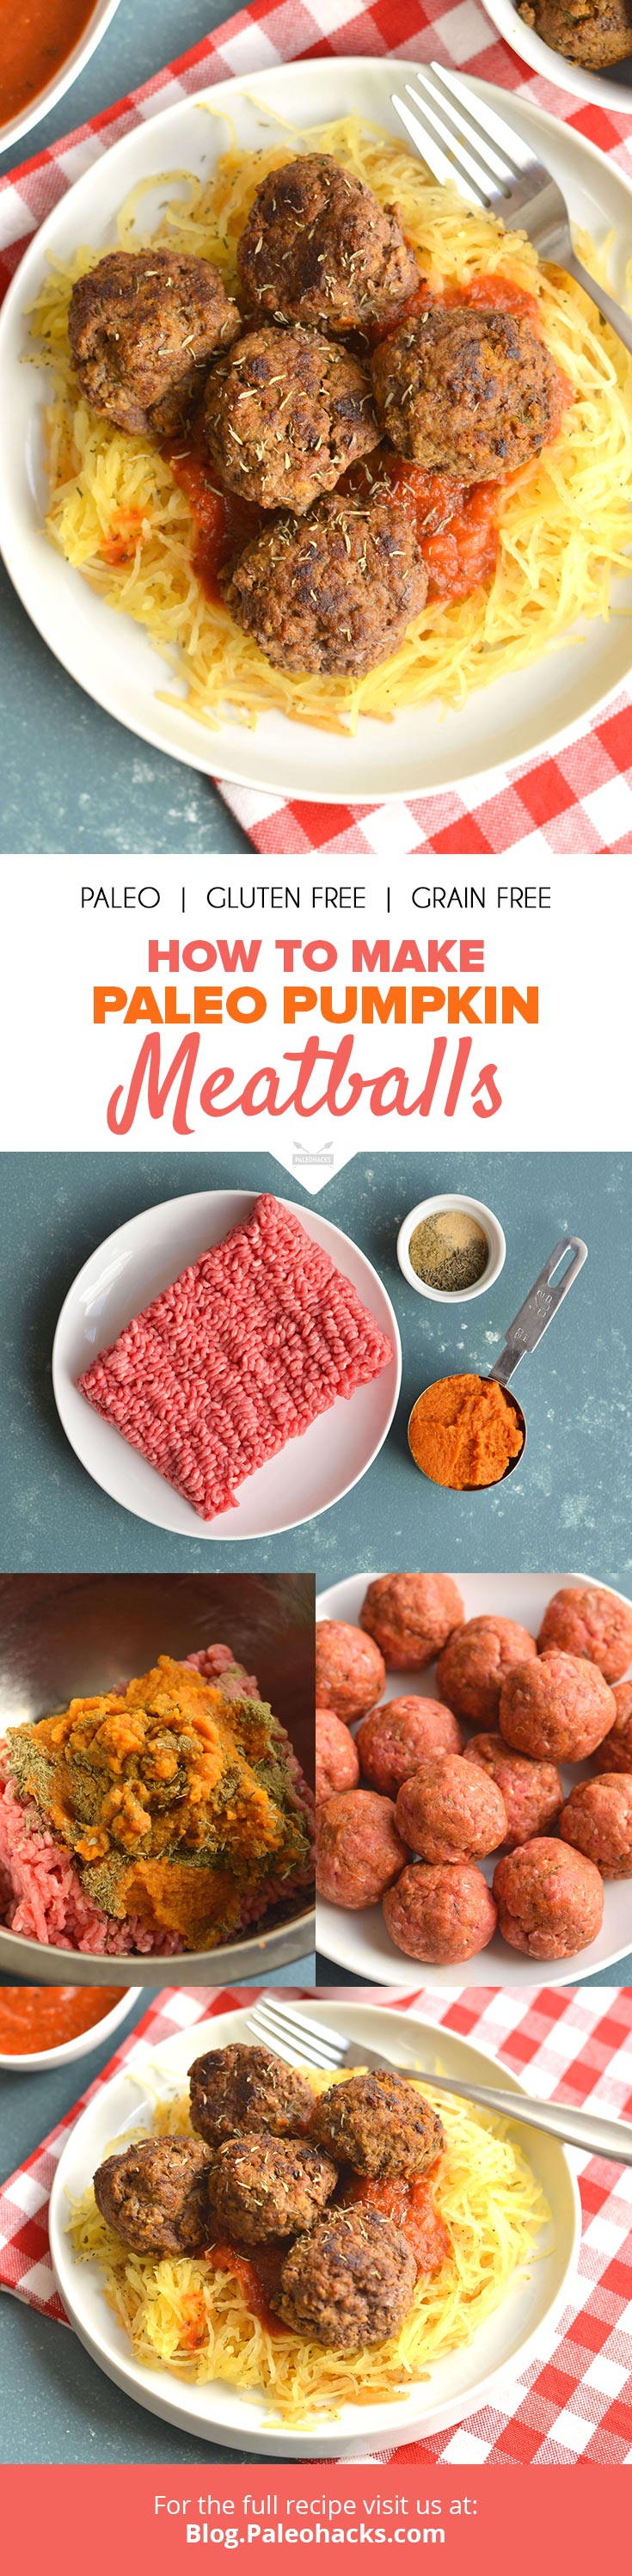 Enter Paleo Pumpkin Meatballs! A savory, easy-to-make fall-inspired dish made with five ingredients – beef, pumpkin purée, thyme and sage.